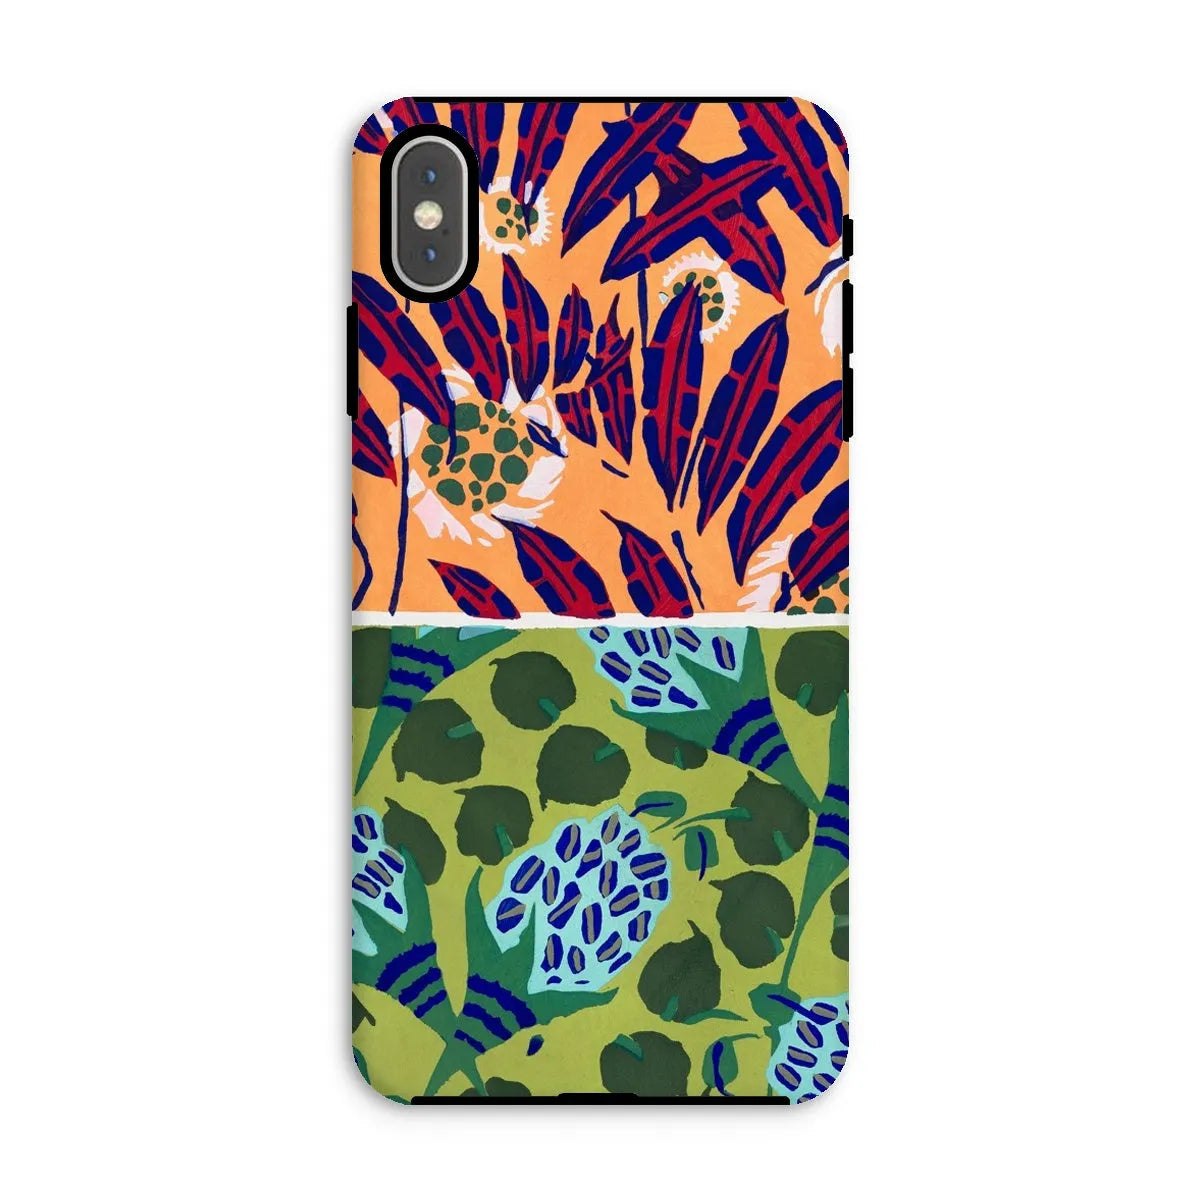 Fabric & Rugs Too - Pochoir Pattern Phone Case - E. A. Séguy - Iphone Xs Max / Matte - Mobile Phone Cases - Aesthetic